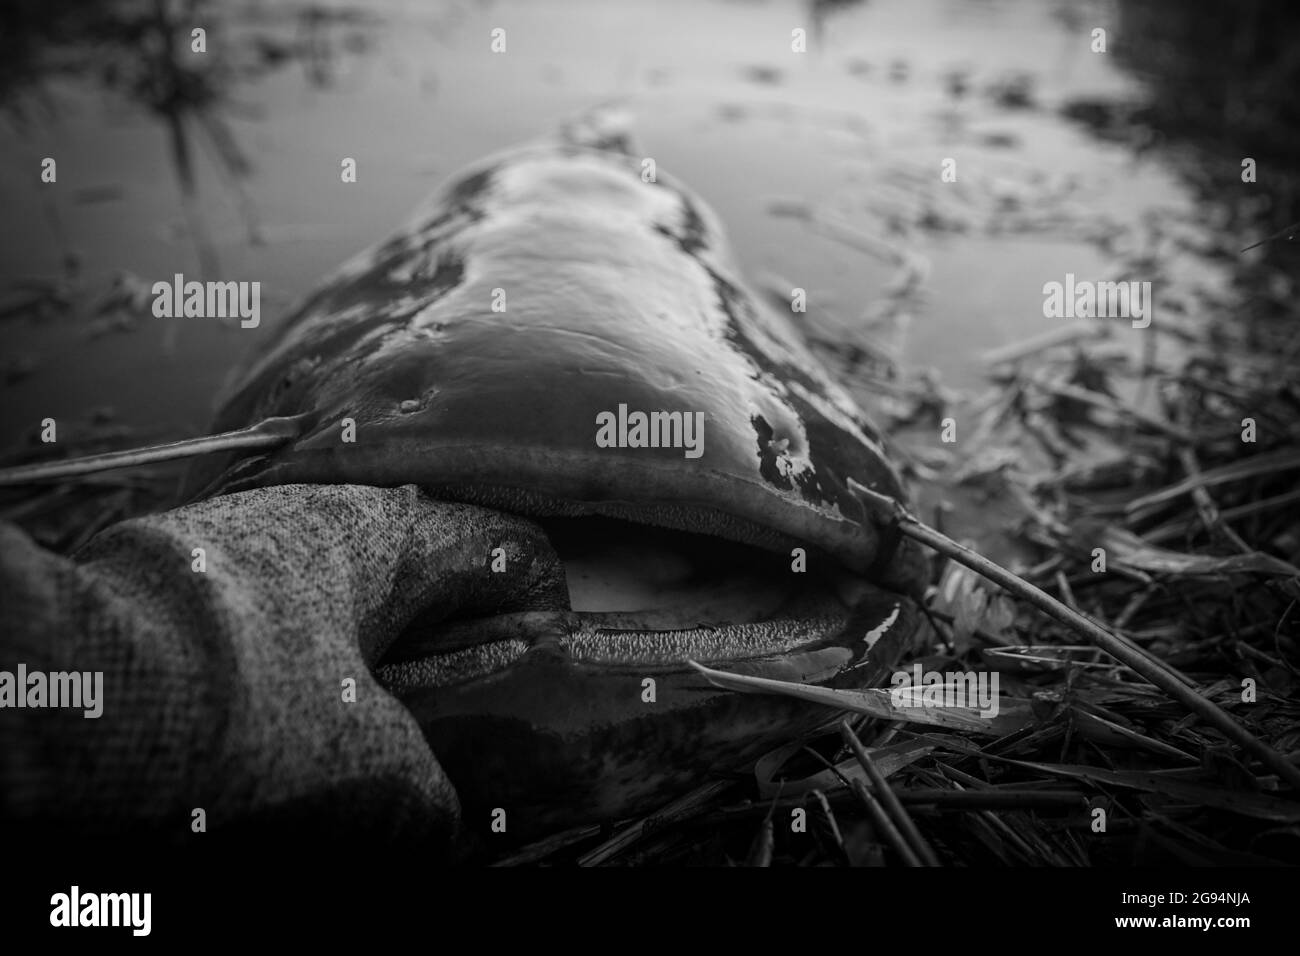 Grayscale shot of a hand in a common catfish's mouth Stock Photo